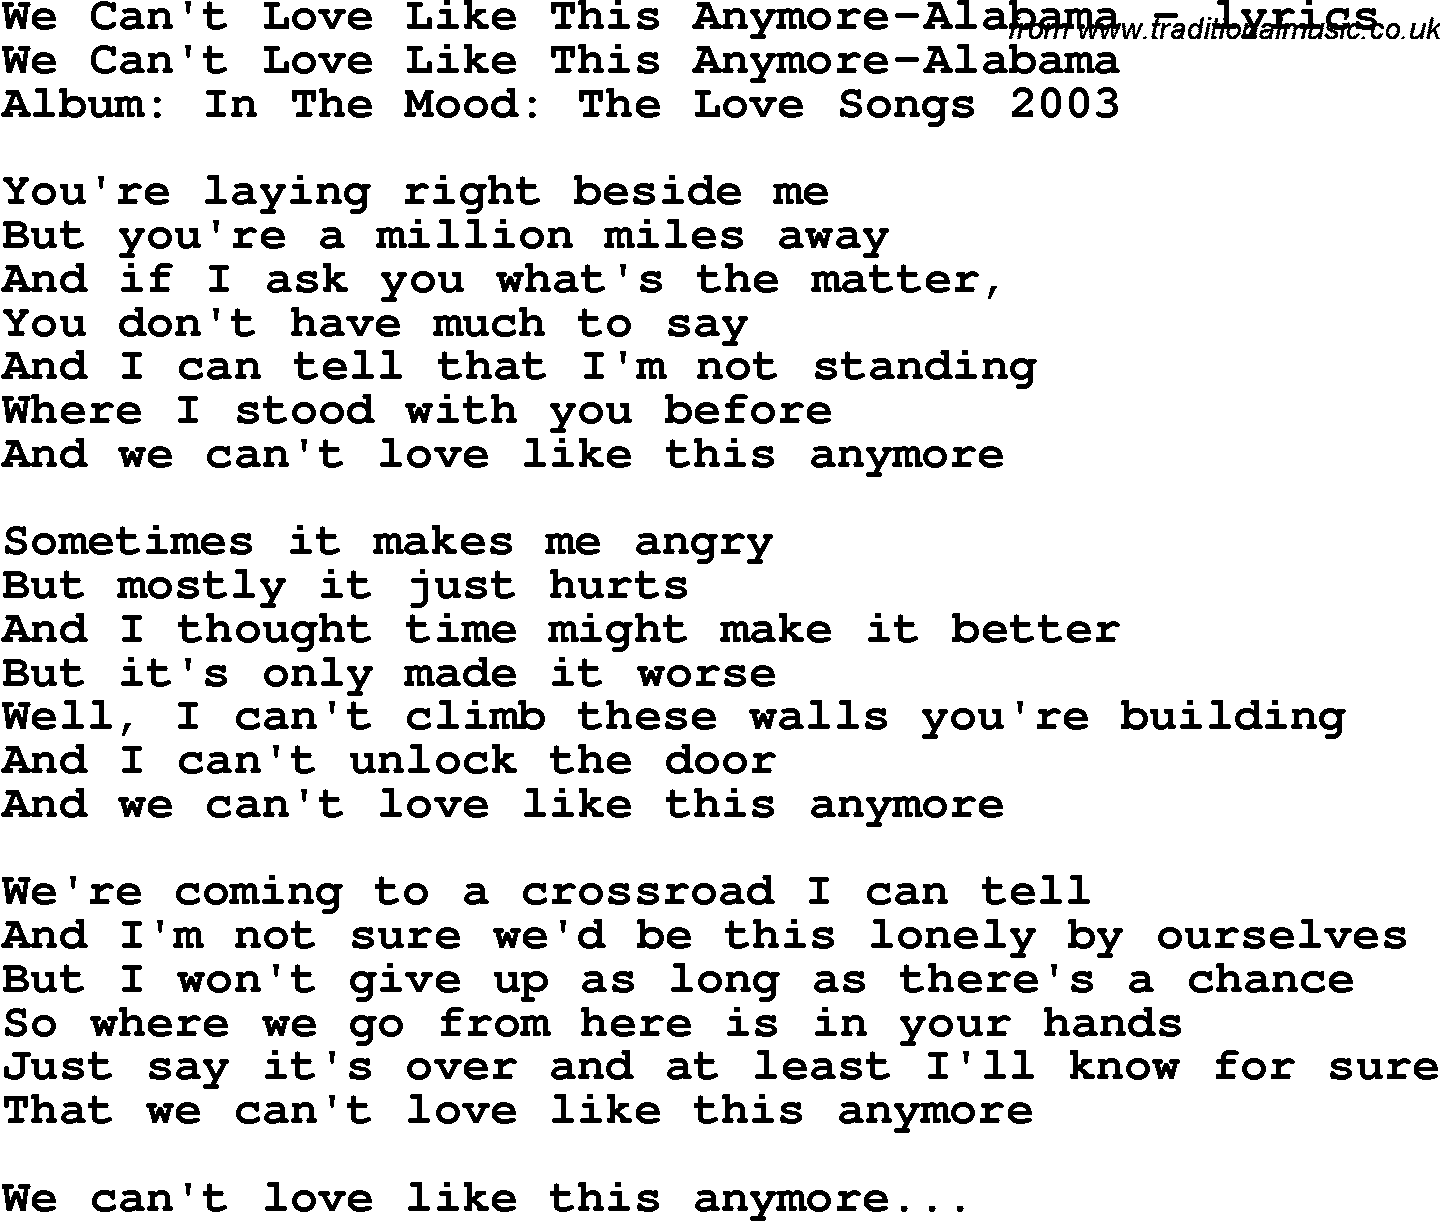 Love Song Lyrics for: We Can't Love Like This Anymore-Alabama